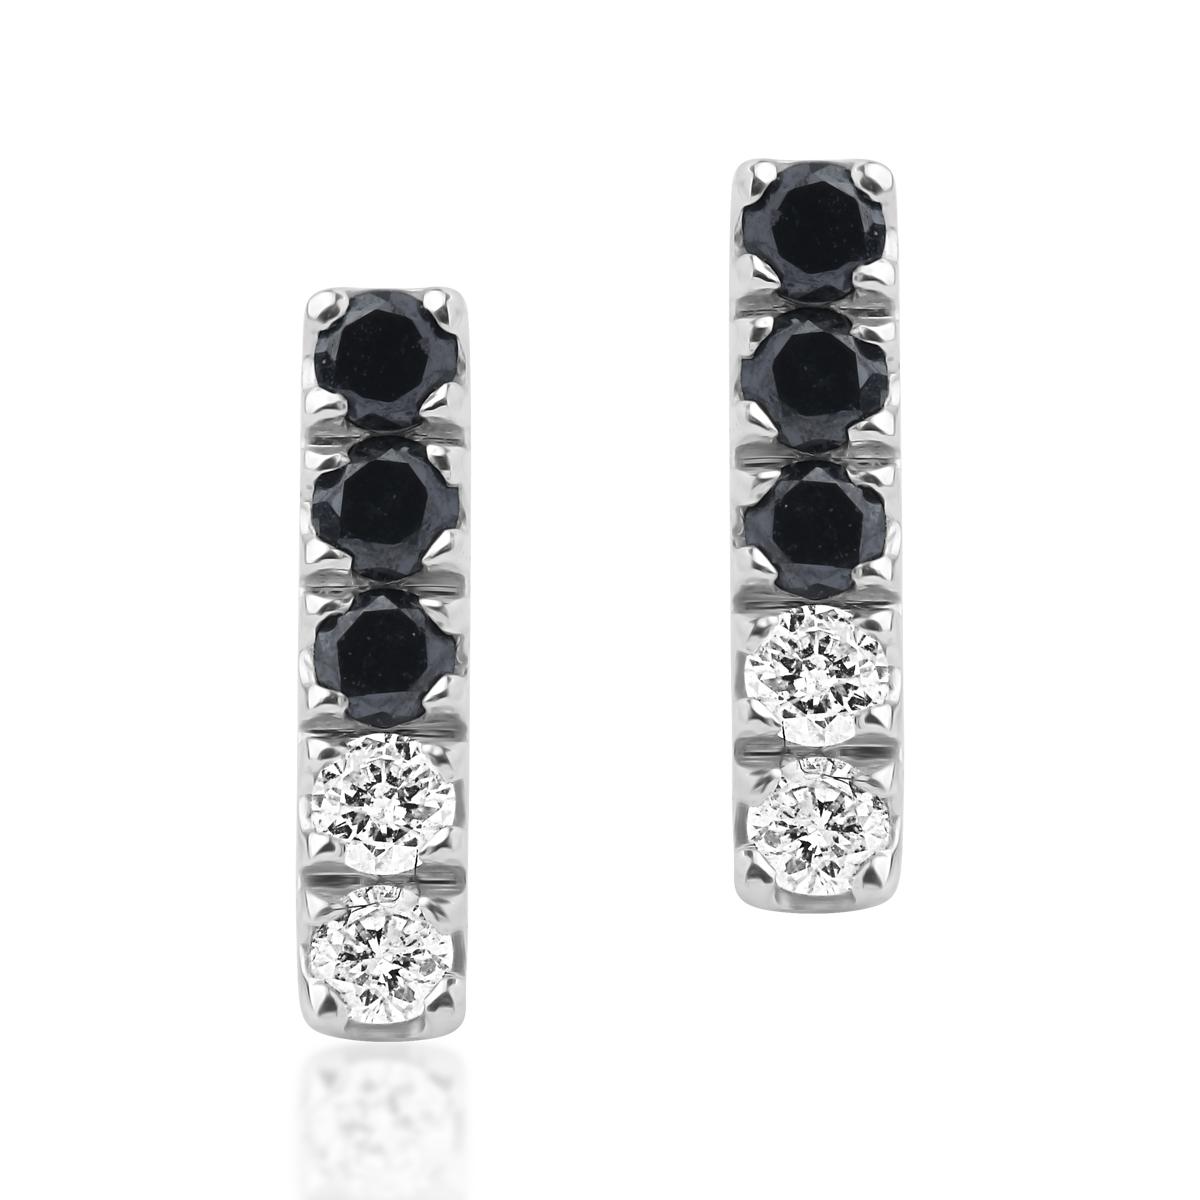 14K white gold earrings with 0.08ct clear diamonds and 0.12ct black diamonds